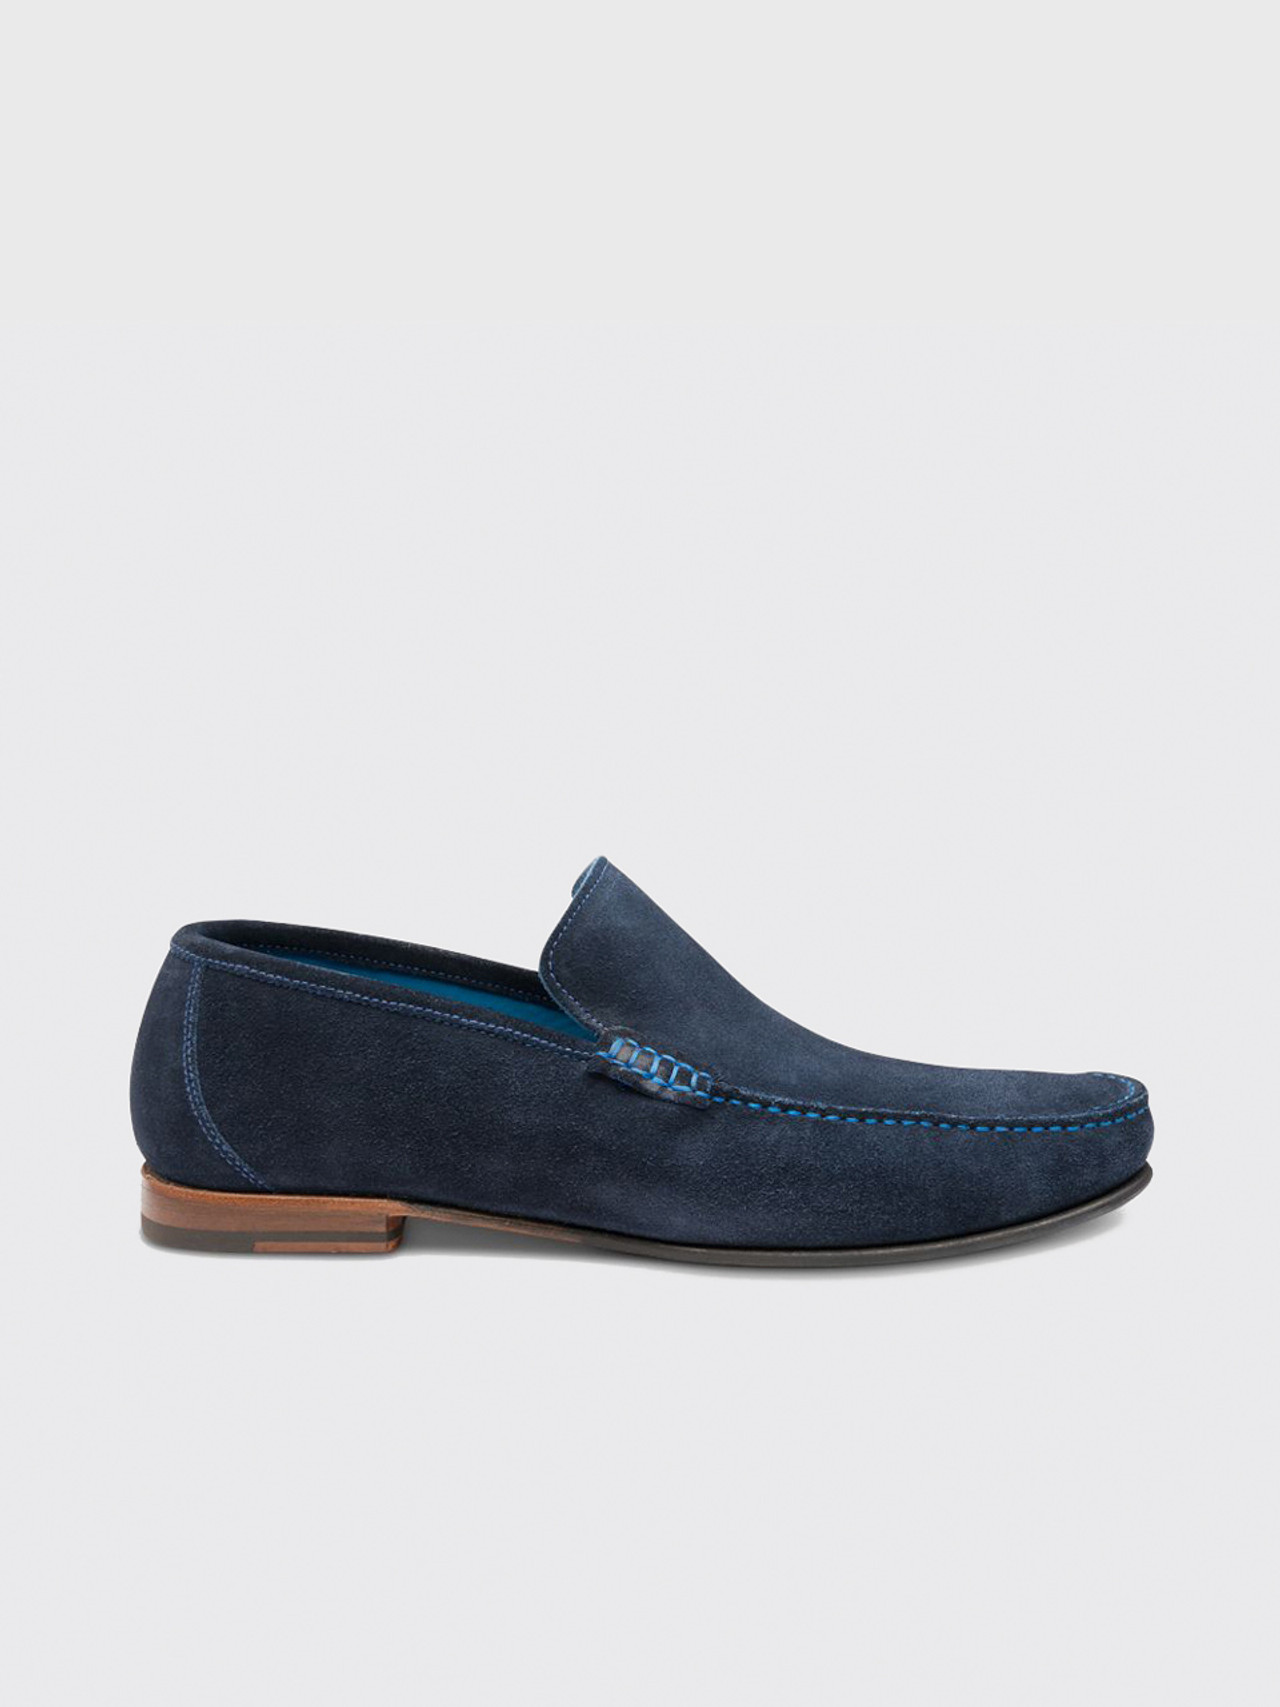 Navy Loake Nicholson Suede Loafer | Peter Christian